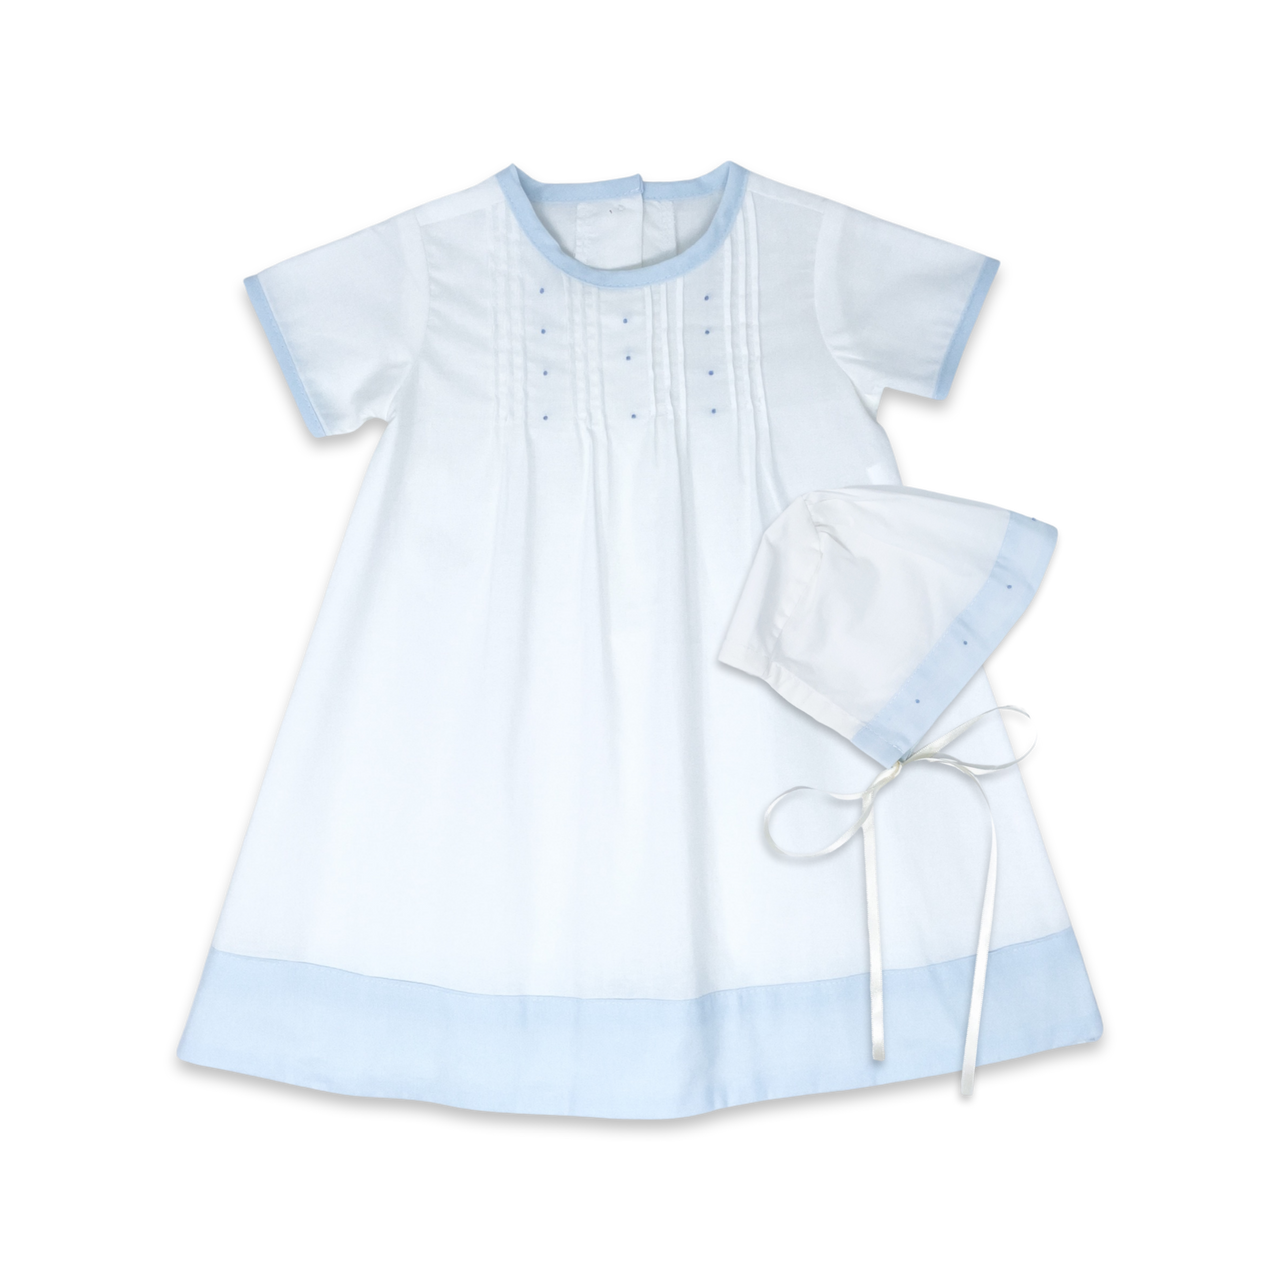 Lullaby Set Blessings Daygown Set 5101